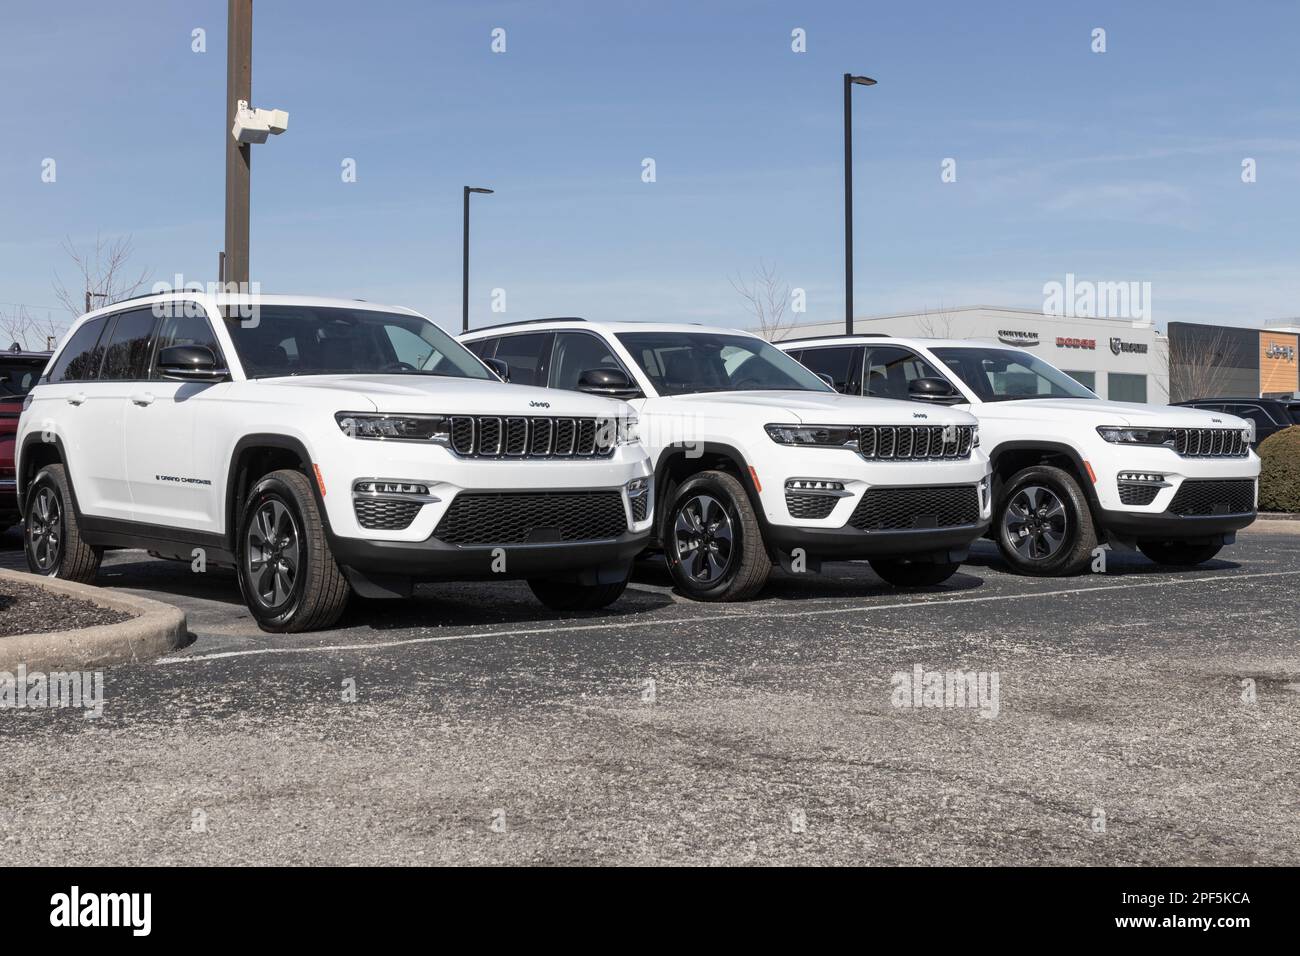 Indianapolis - Circa March 2023: Jeep Grand Cherokee display at a dealership. Jeep offers the Grand Cherokee in Laredo, Limited, and Trailhawk models. Stock Photo